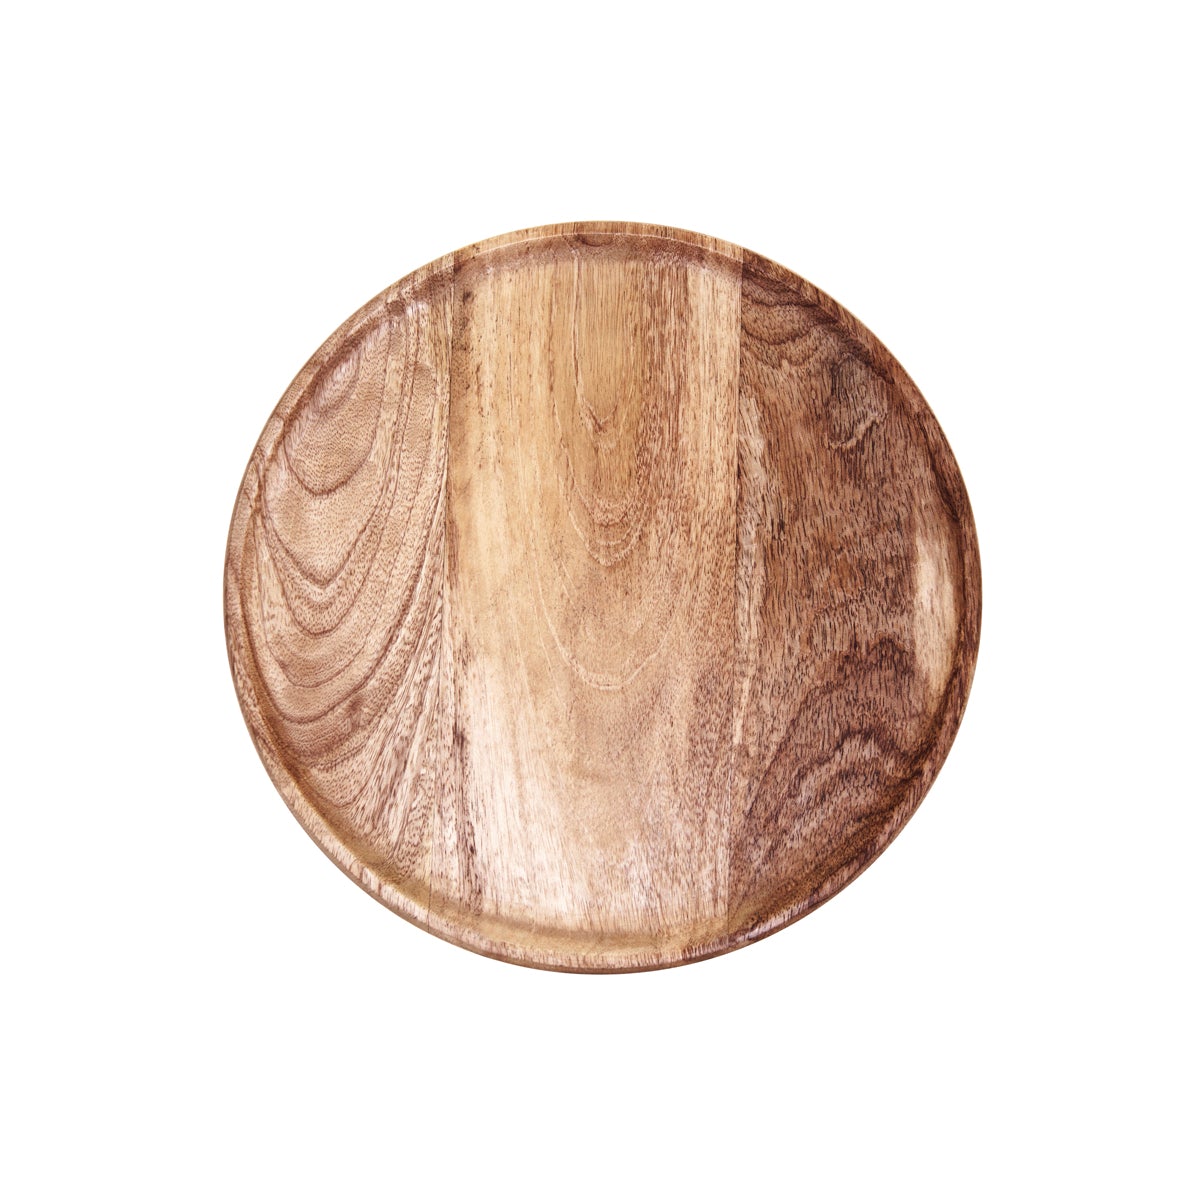 '04890 Chef Inox Mangowood Round Serving Board Natural 300x15mm Tomkin Australia Hospitality Supplies